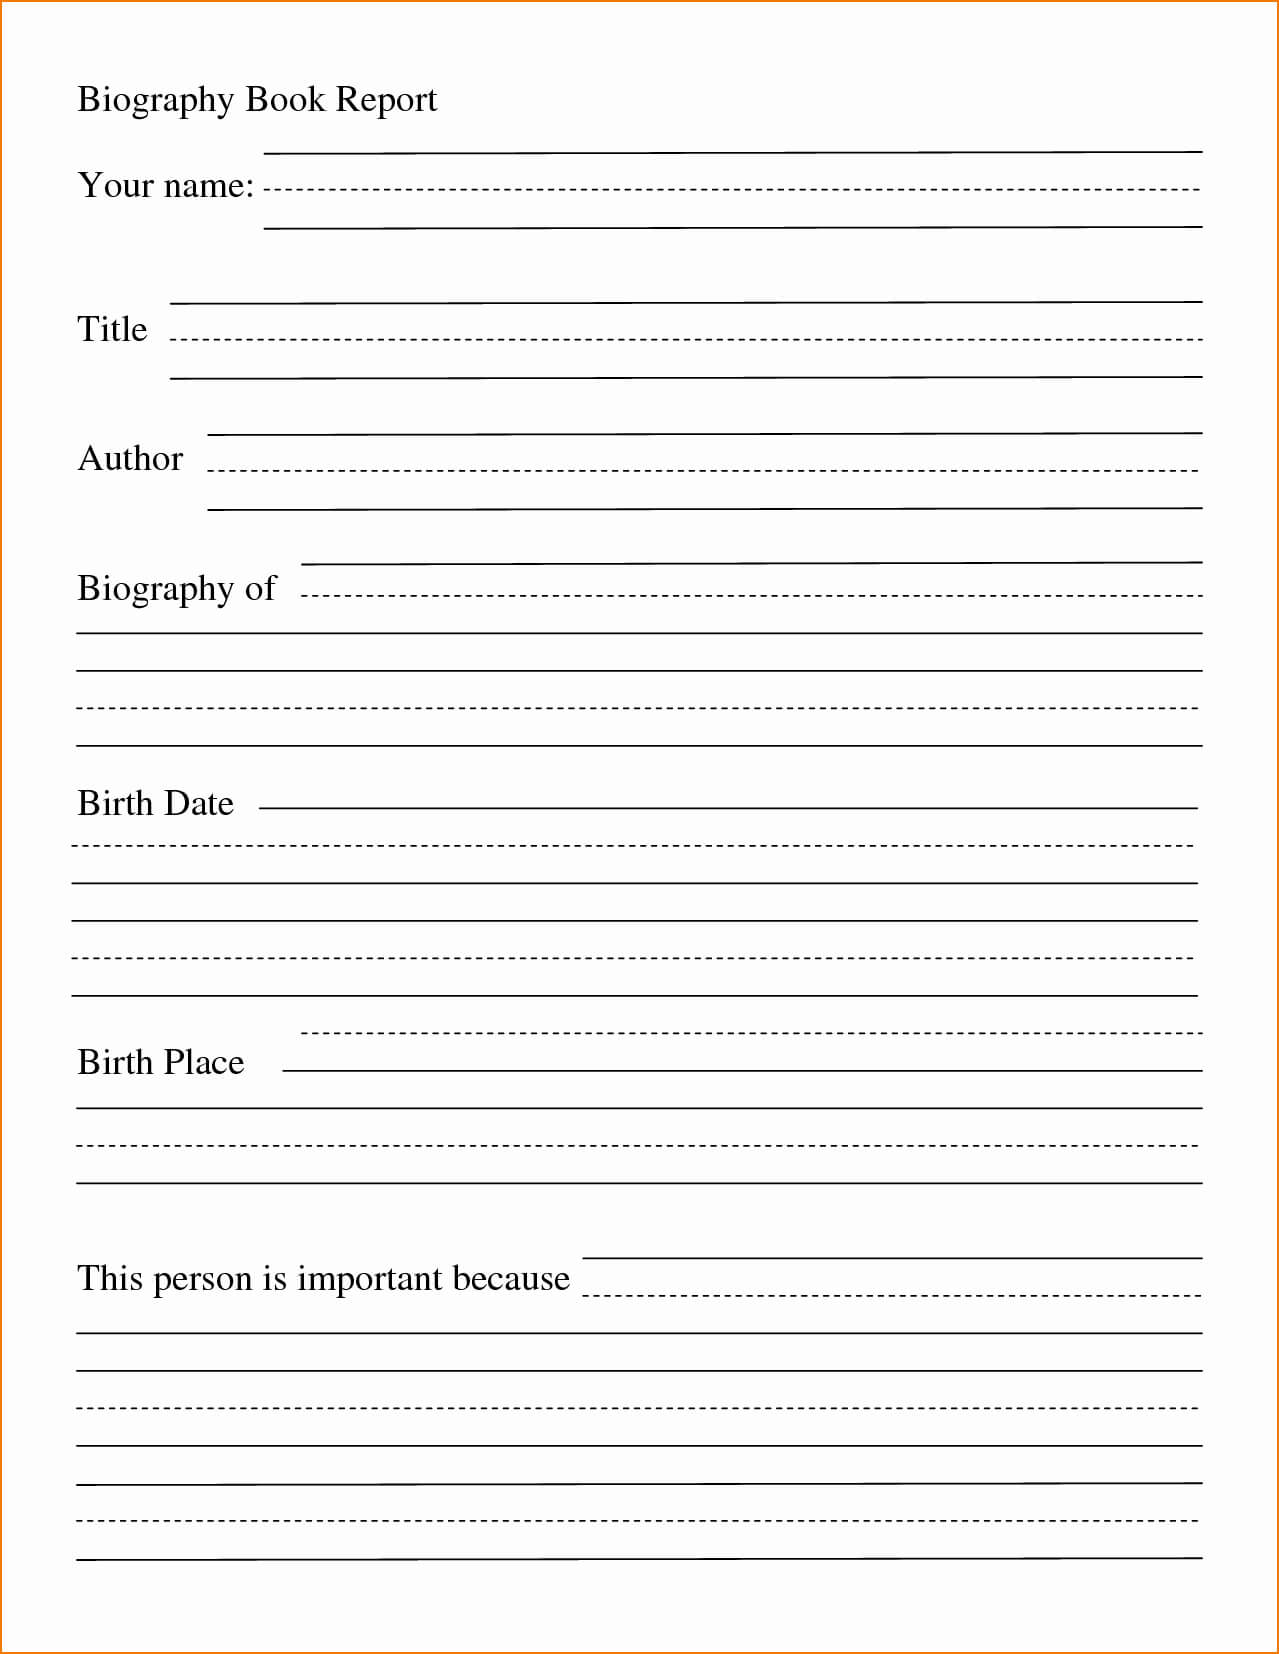 Financial Tatements Template Pdf For 2Nd Grade Book Report Pertaining To 2Nd Grade Book Report Template